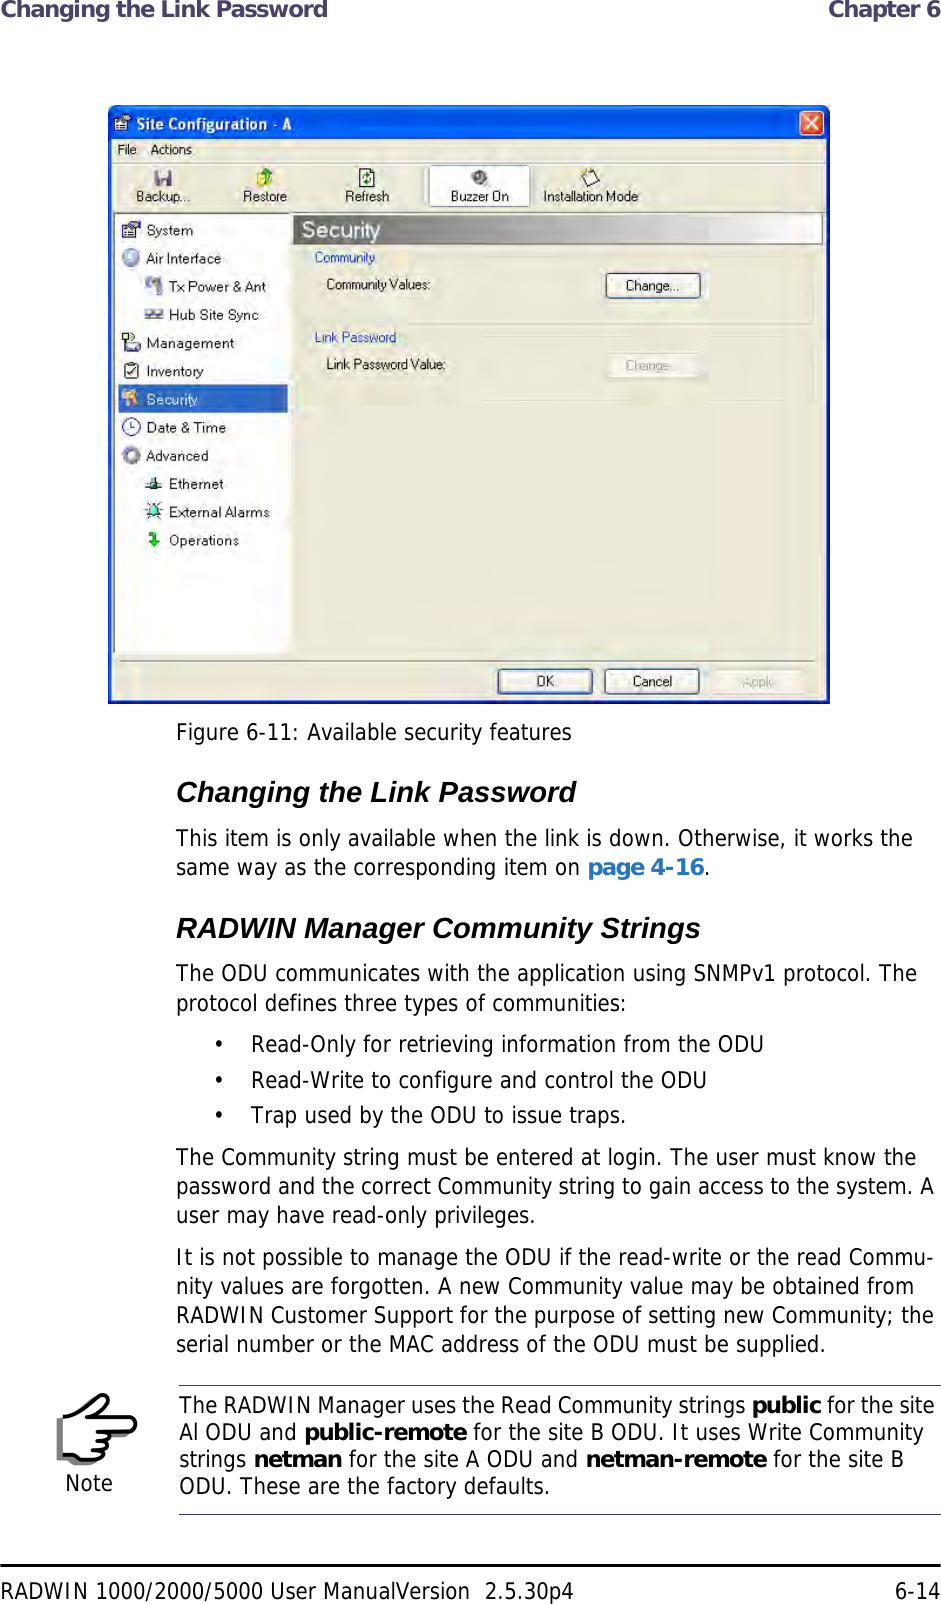 Changing the Link Password  Chapter 6RADWIN 1000/2000/5000 User ManualVersion  2.5.30p4 6-14 Figure 6-11: Available security featuresChanging the Link PasswordThis item is only available when the link is down. Otherwise, it works the same way as the corresponding item on page 4-16.RADWIN Manager Community StringsThe ODU communicates with the application using SNMPv1 protocol. The protocol defines three types of communities:• Read-Only for retrieving information from the ODU• Read-Write to configure and control the ODU• Trap used by the ODU to issue traps.The Community string must be entered at login. The user must know the password and the correct Community string to gain access to the system. A user may have read-only privileges.It is not possible to manage the ODU if the read-write or the read Commu-nity values are forgotten. A new Community value may be obtained from RADWIN Customer Support for the purpose of setting new Community; the serial number or the MAC address of the ODU must be supplied.NoteThe RADWIN Manager uses the Read Community strings public for the site Al ODU and public-remote for the site B ODU. It uses Write Community strings netman for the site A ODU and netman-remote for the site B ODU. These are the factory defaults.